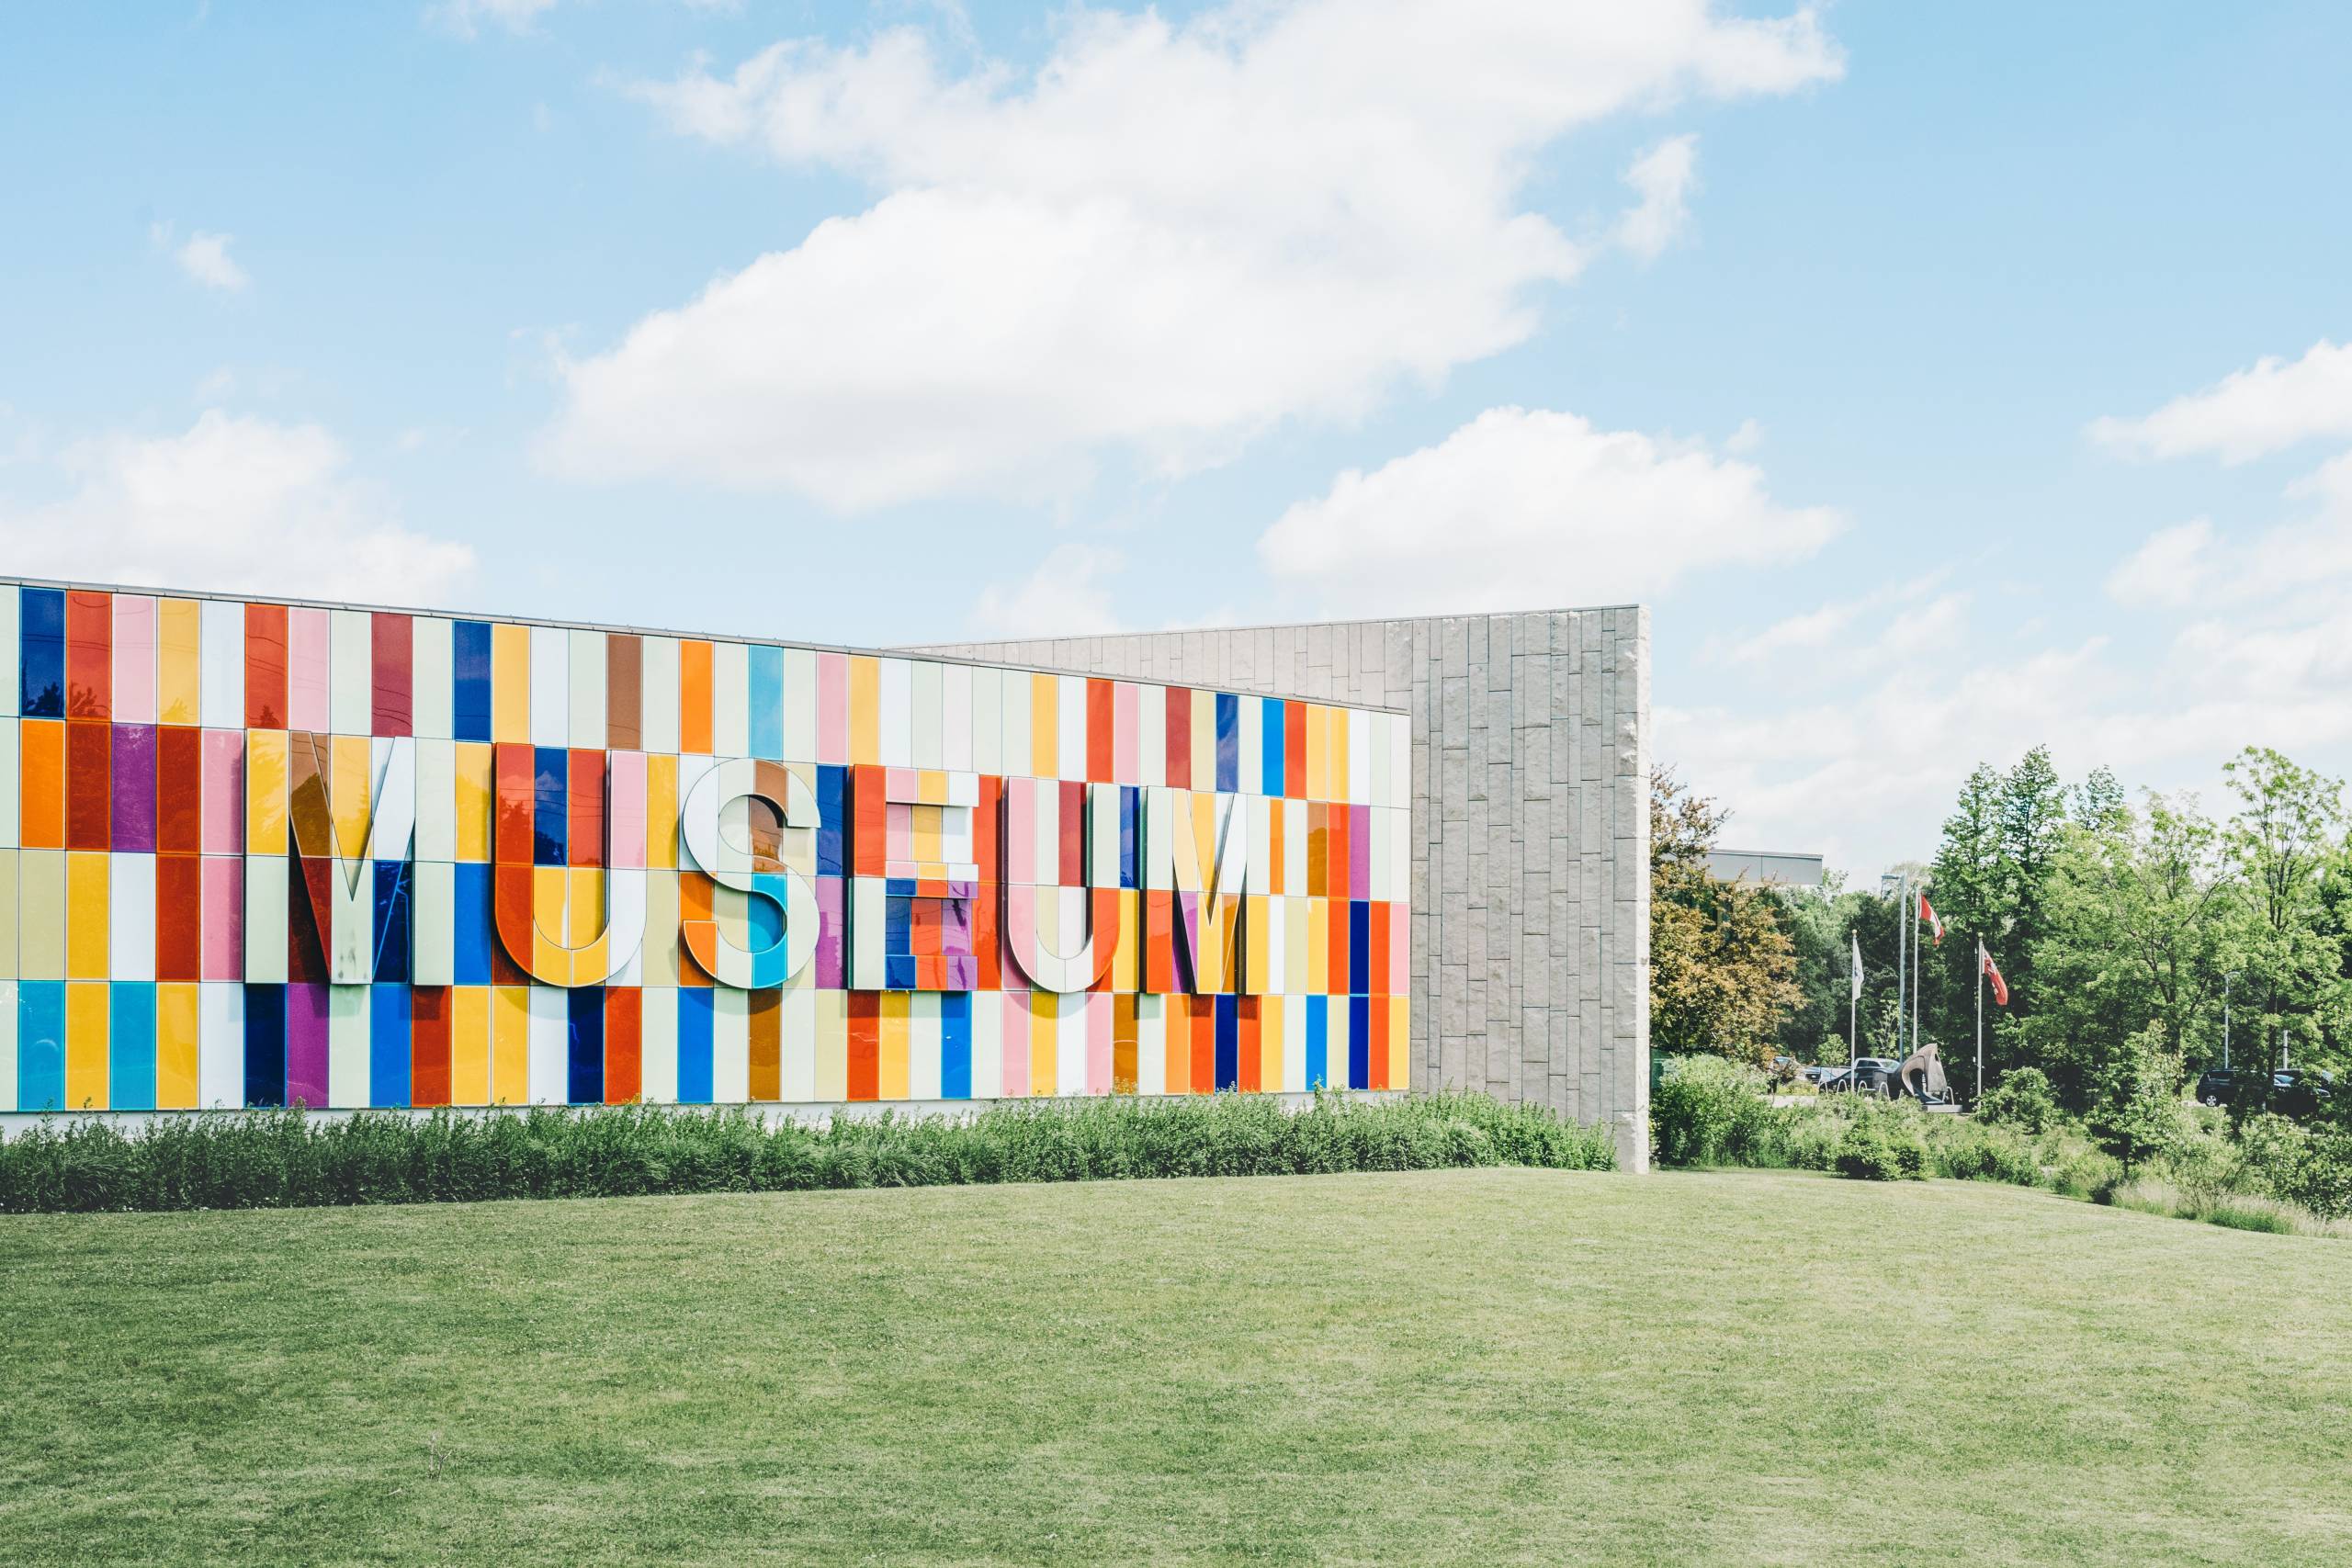 An image of a multicolored museum sign on a grassy surface during the day.